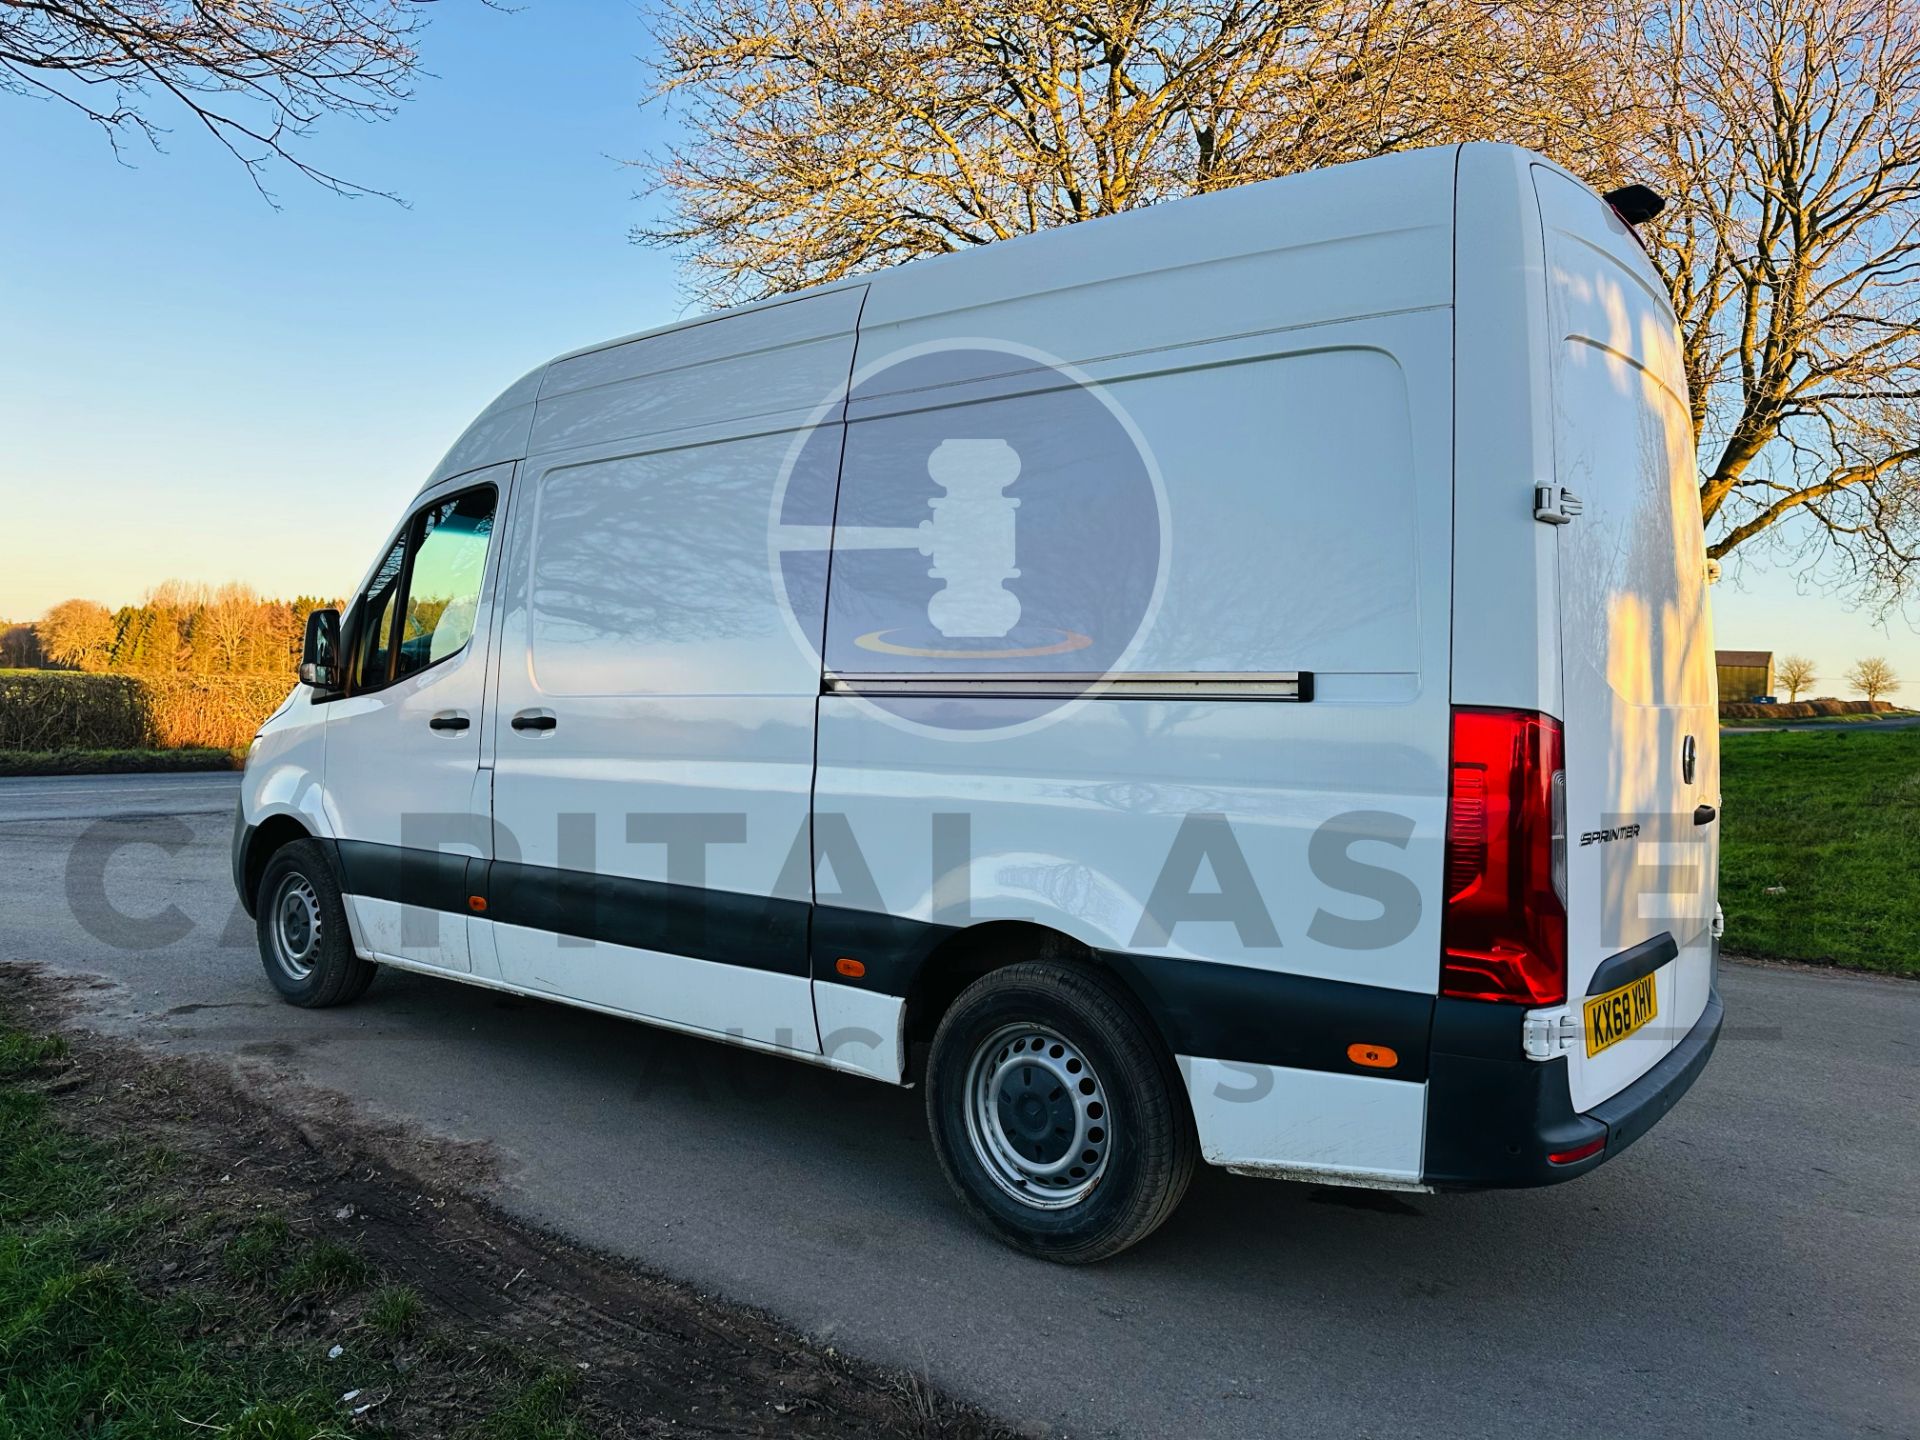 MERCEDES-BENZ SPRINTER 314 CDI *MWB - REFRIGERATED VAN* (2019 - FACELIFT MODEL) *OVERNIGHT STANDBY* - Image 7 of 33